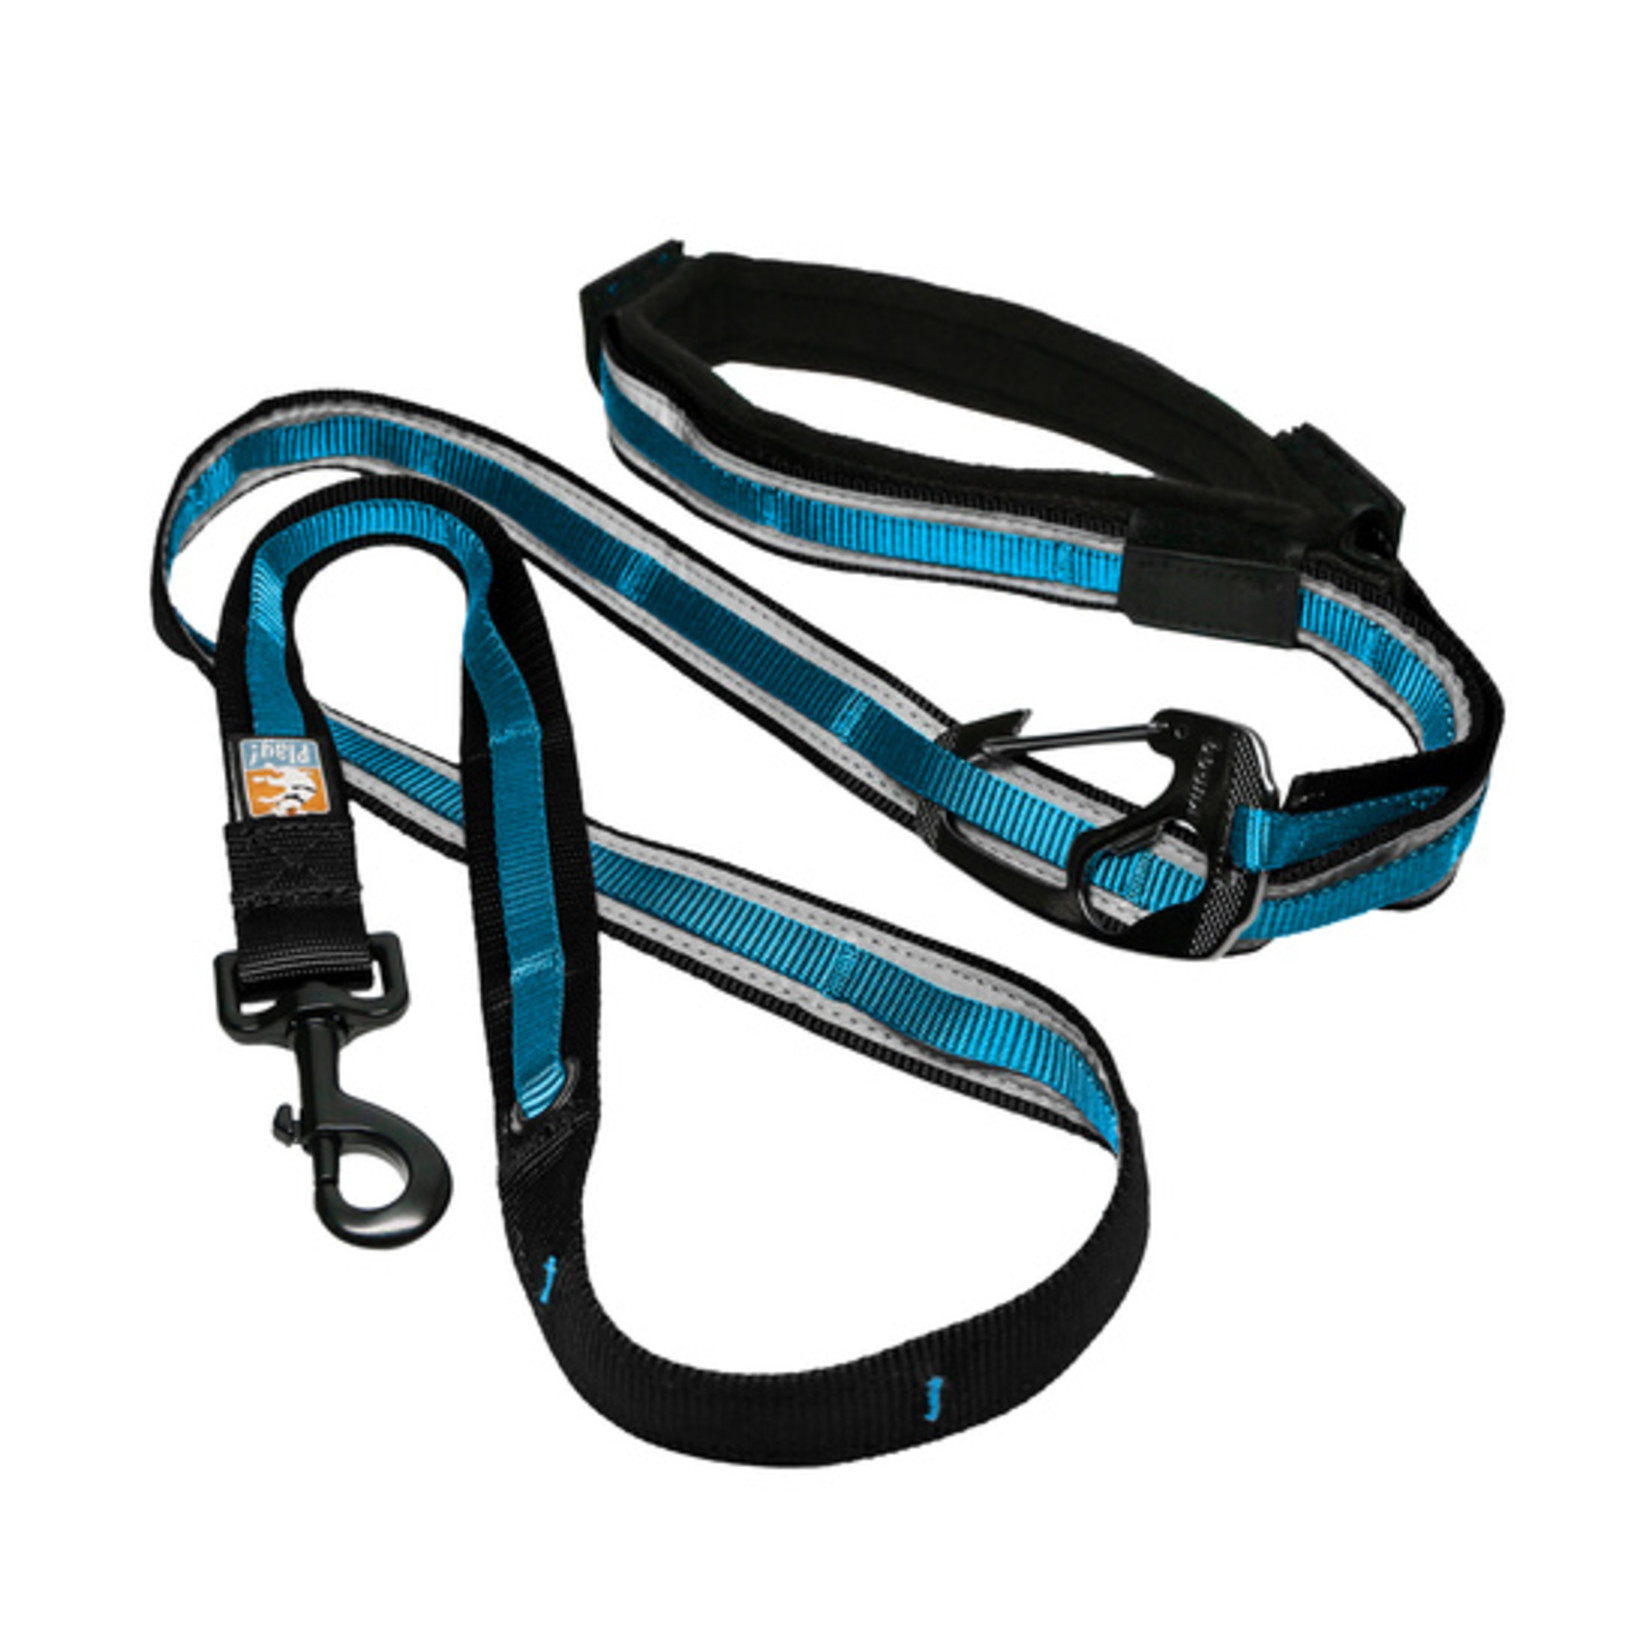 Kurgo Kurgo Quantum 6-in-1 Leash - Hands Free Leash, Double Lead, Tether, and More